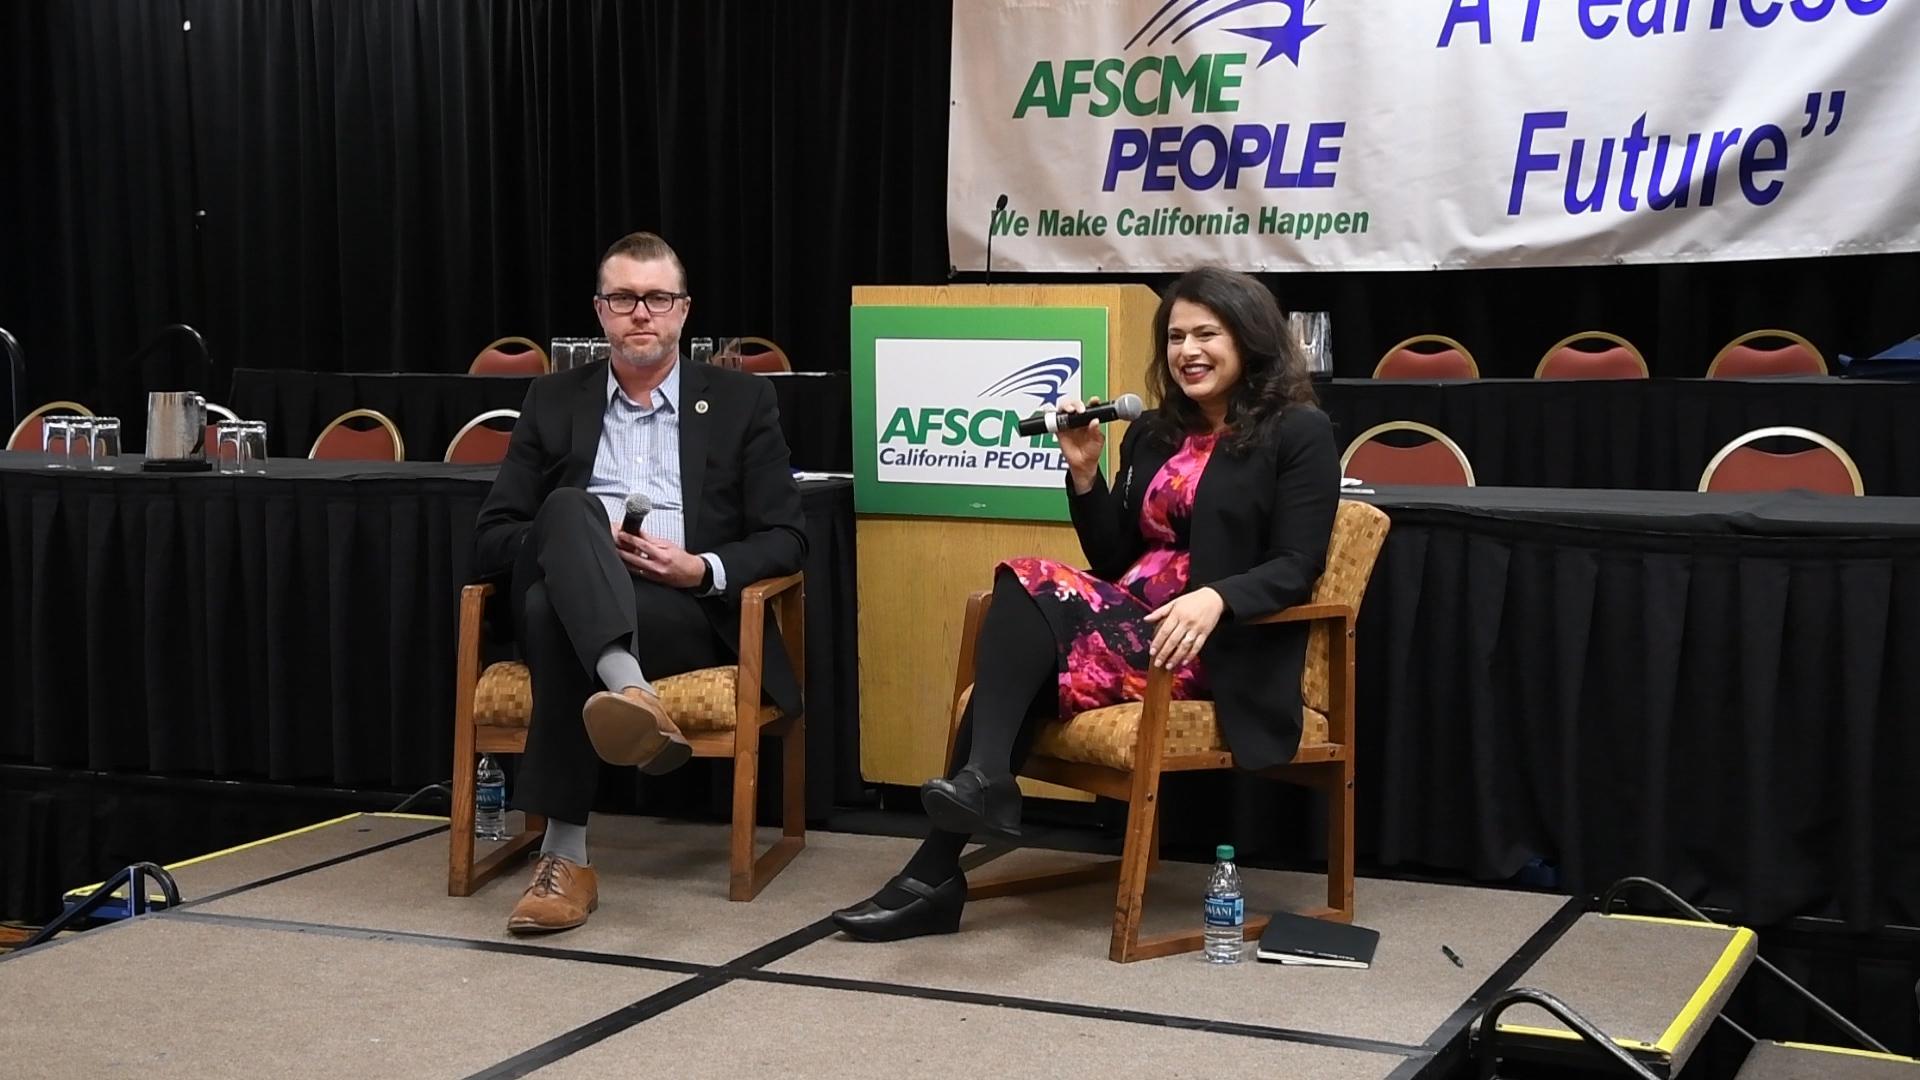 Council 57 Executive Director Michael Seville talks to CalPERS Board President Priya Mathur during a fireside chat at the AFSCME California PEOPLE Convention